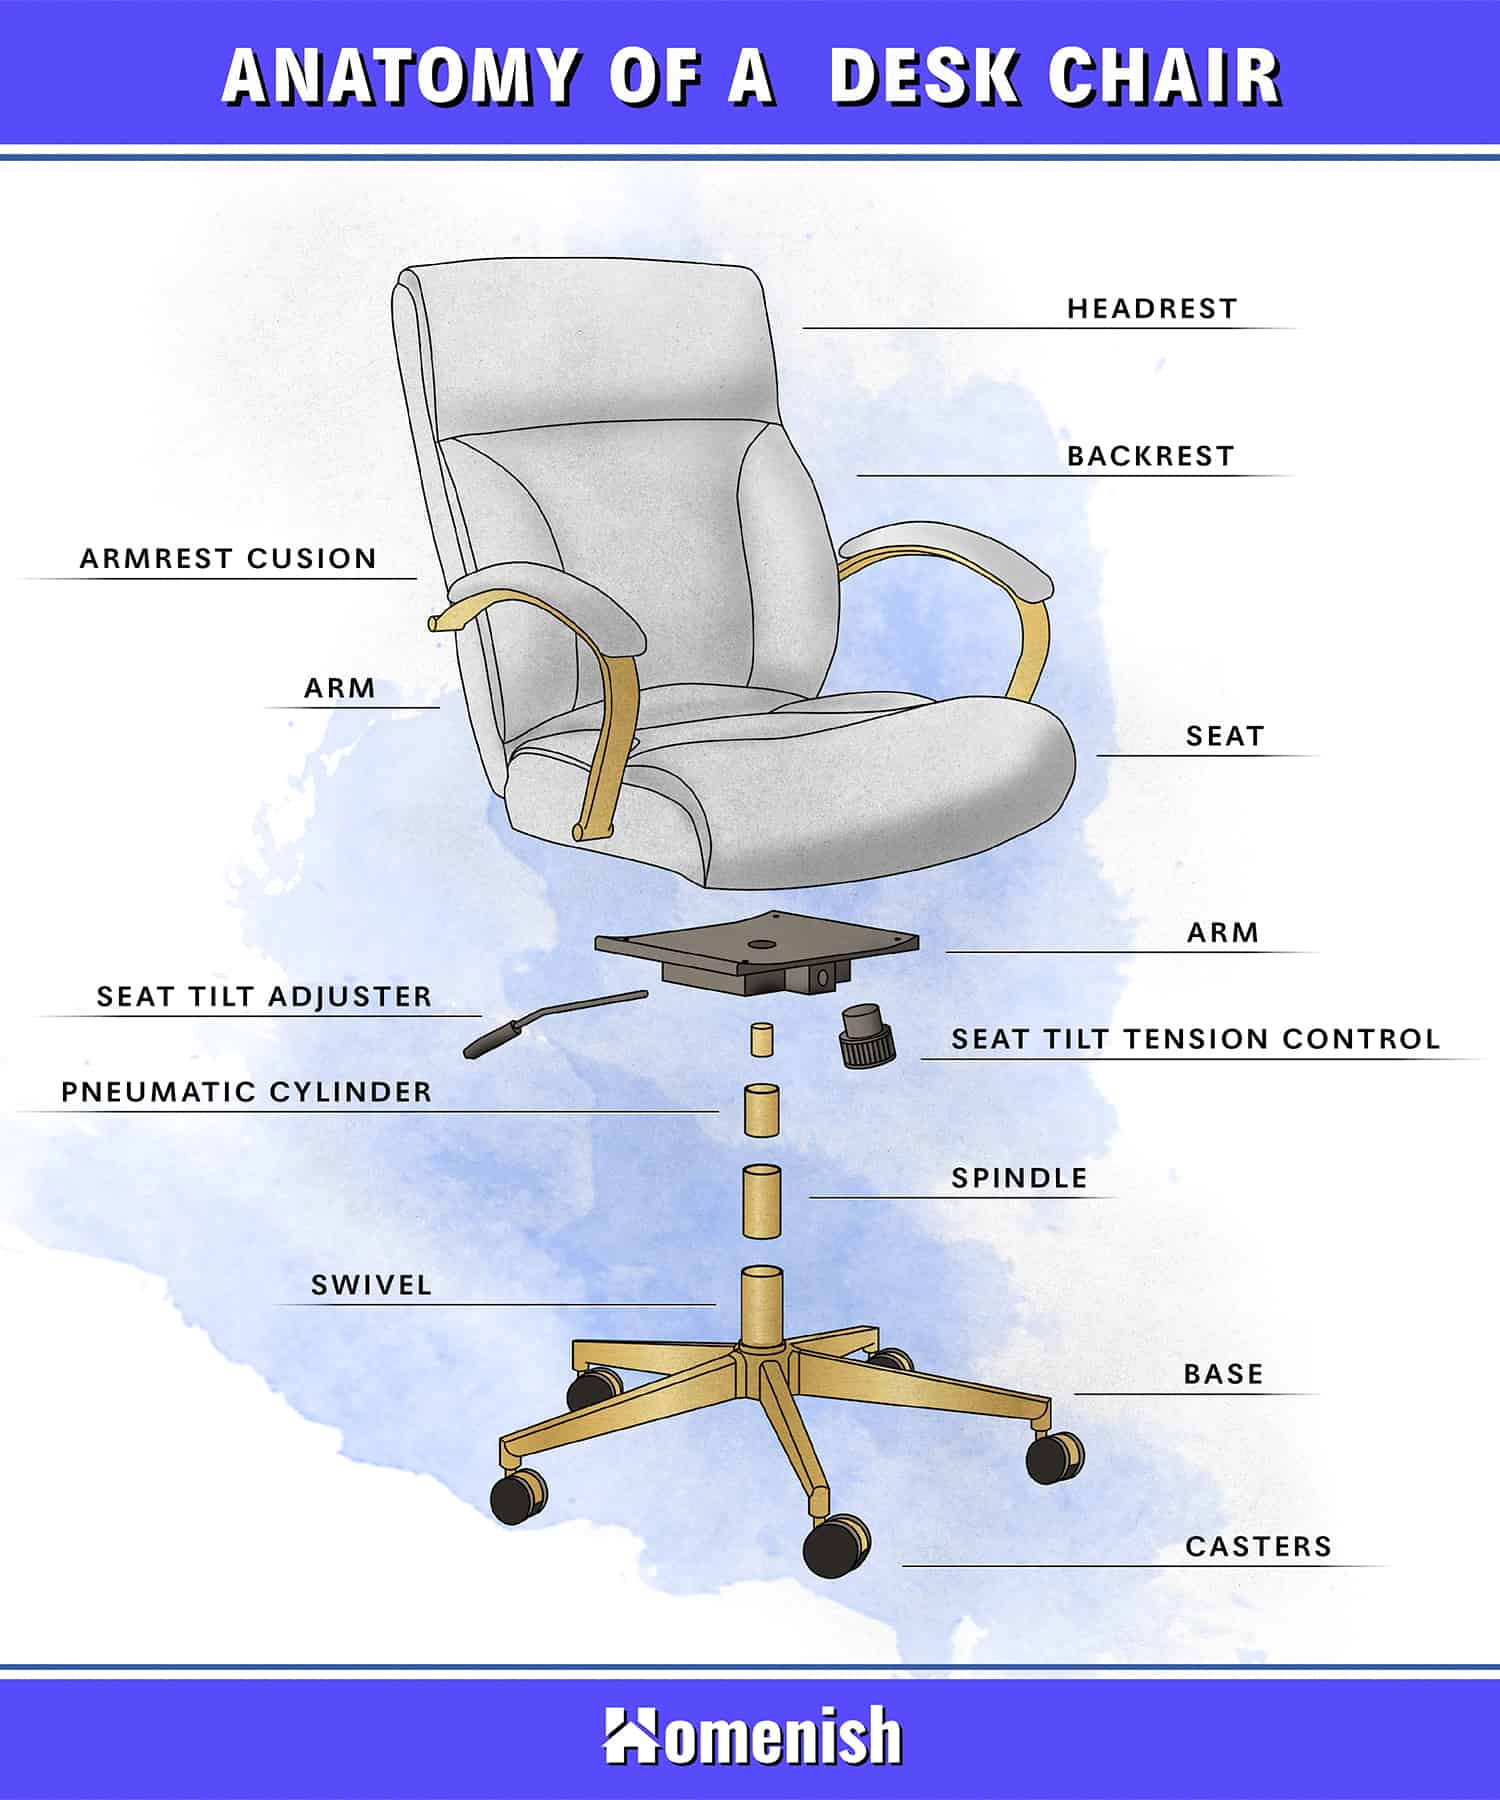 Parts Of A Chair Explained 4 Diagrams, What Is A Chair Without Arms Called